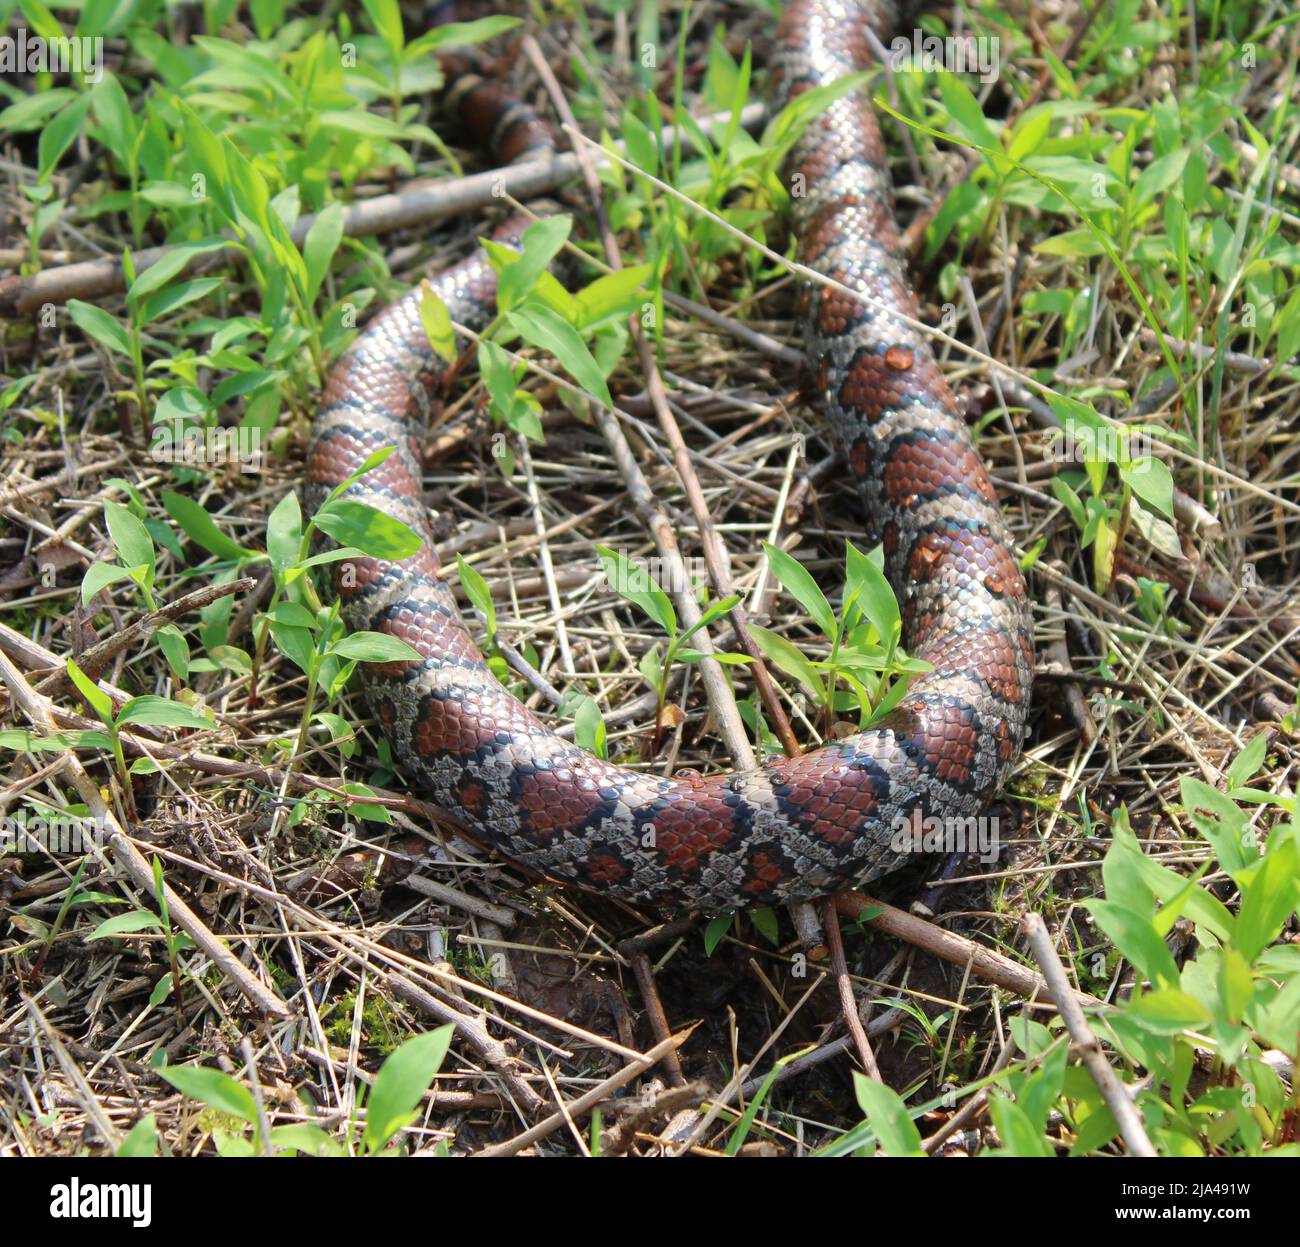 A Detail of the Pattern on a Wild Eastern Milk Snake Stock Photo